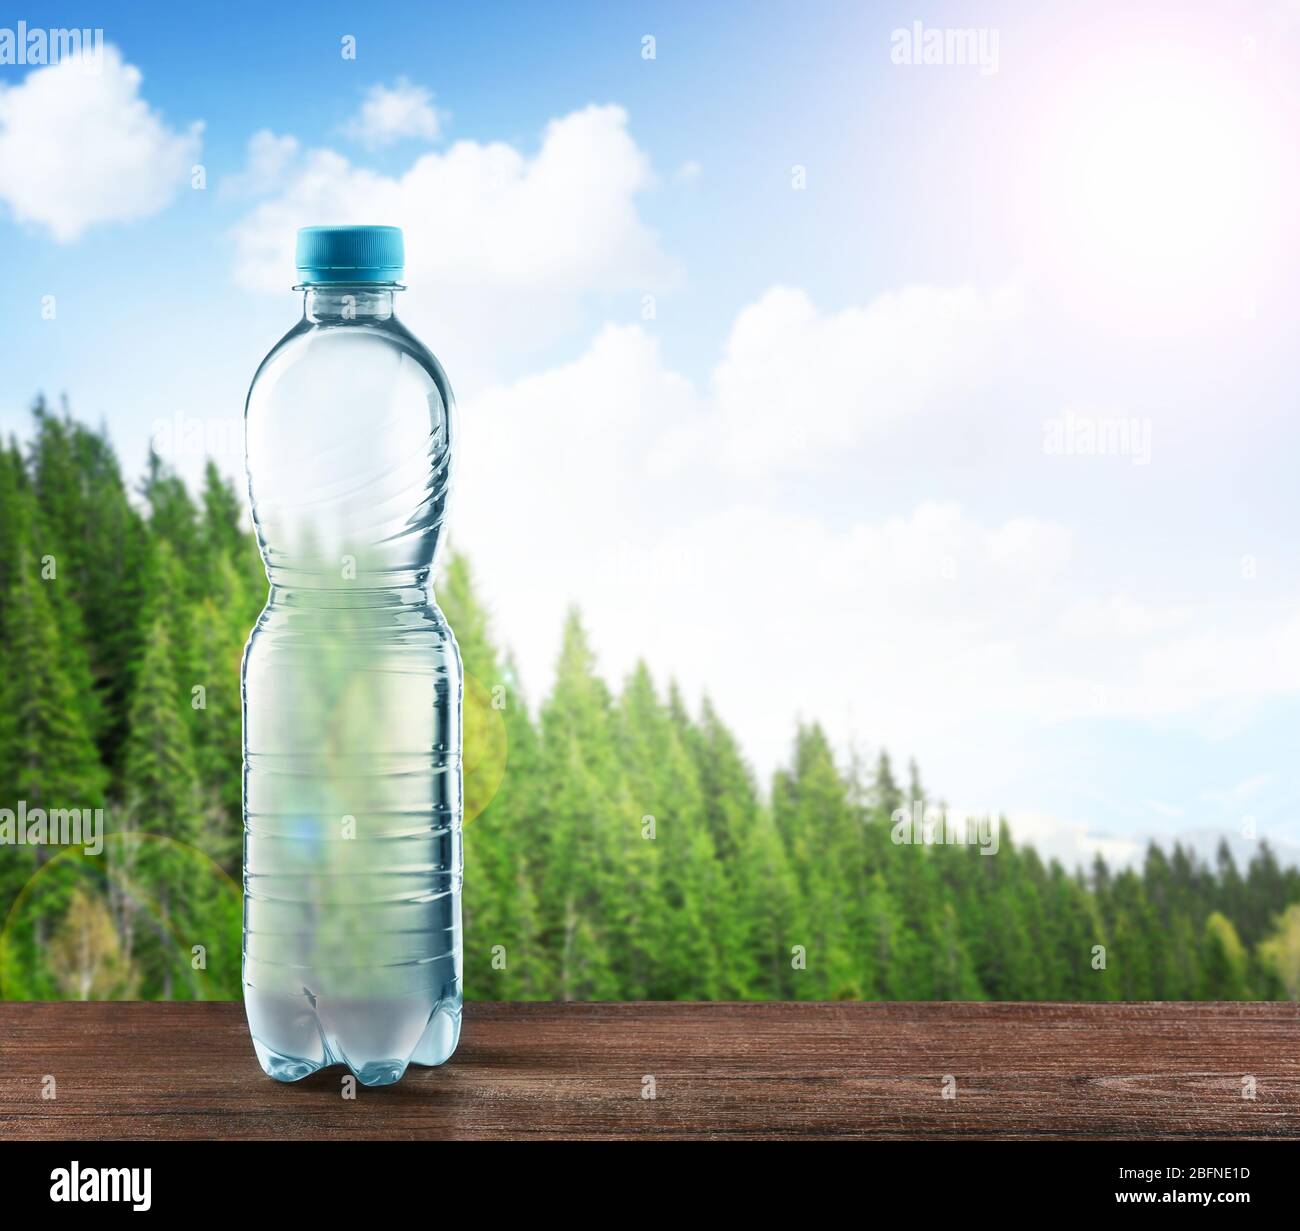 Bottle of clear water on wooden table against nature background Stock Photo